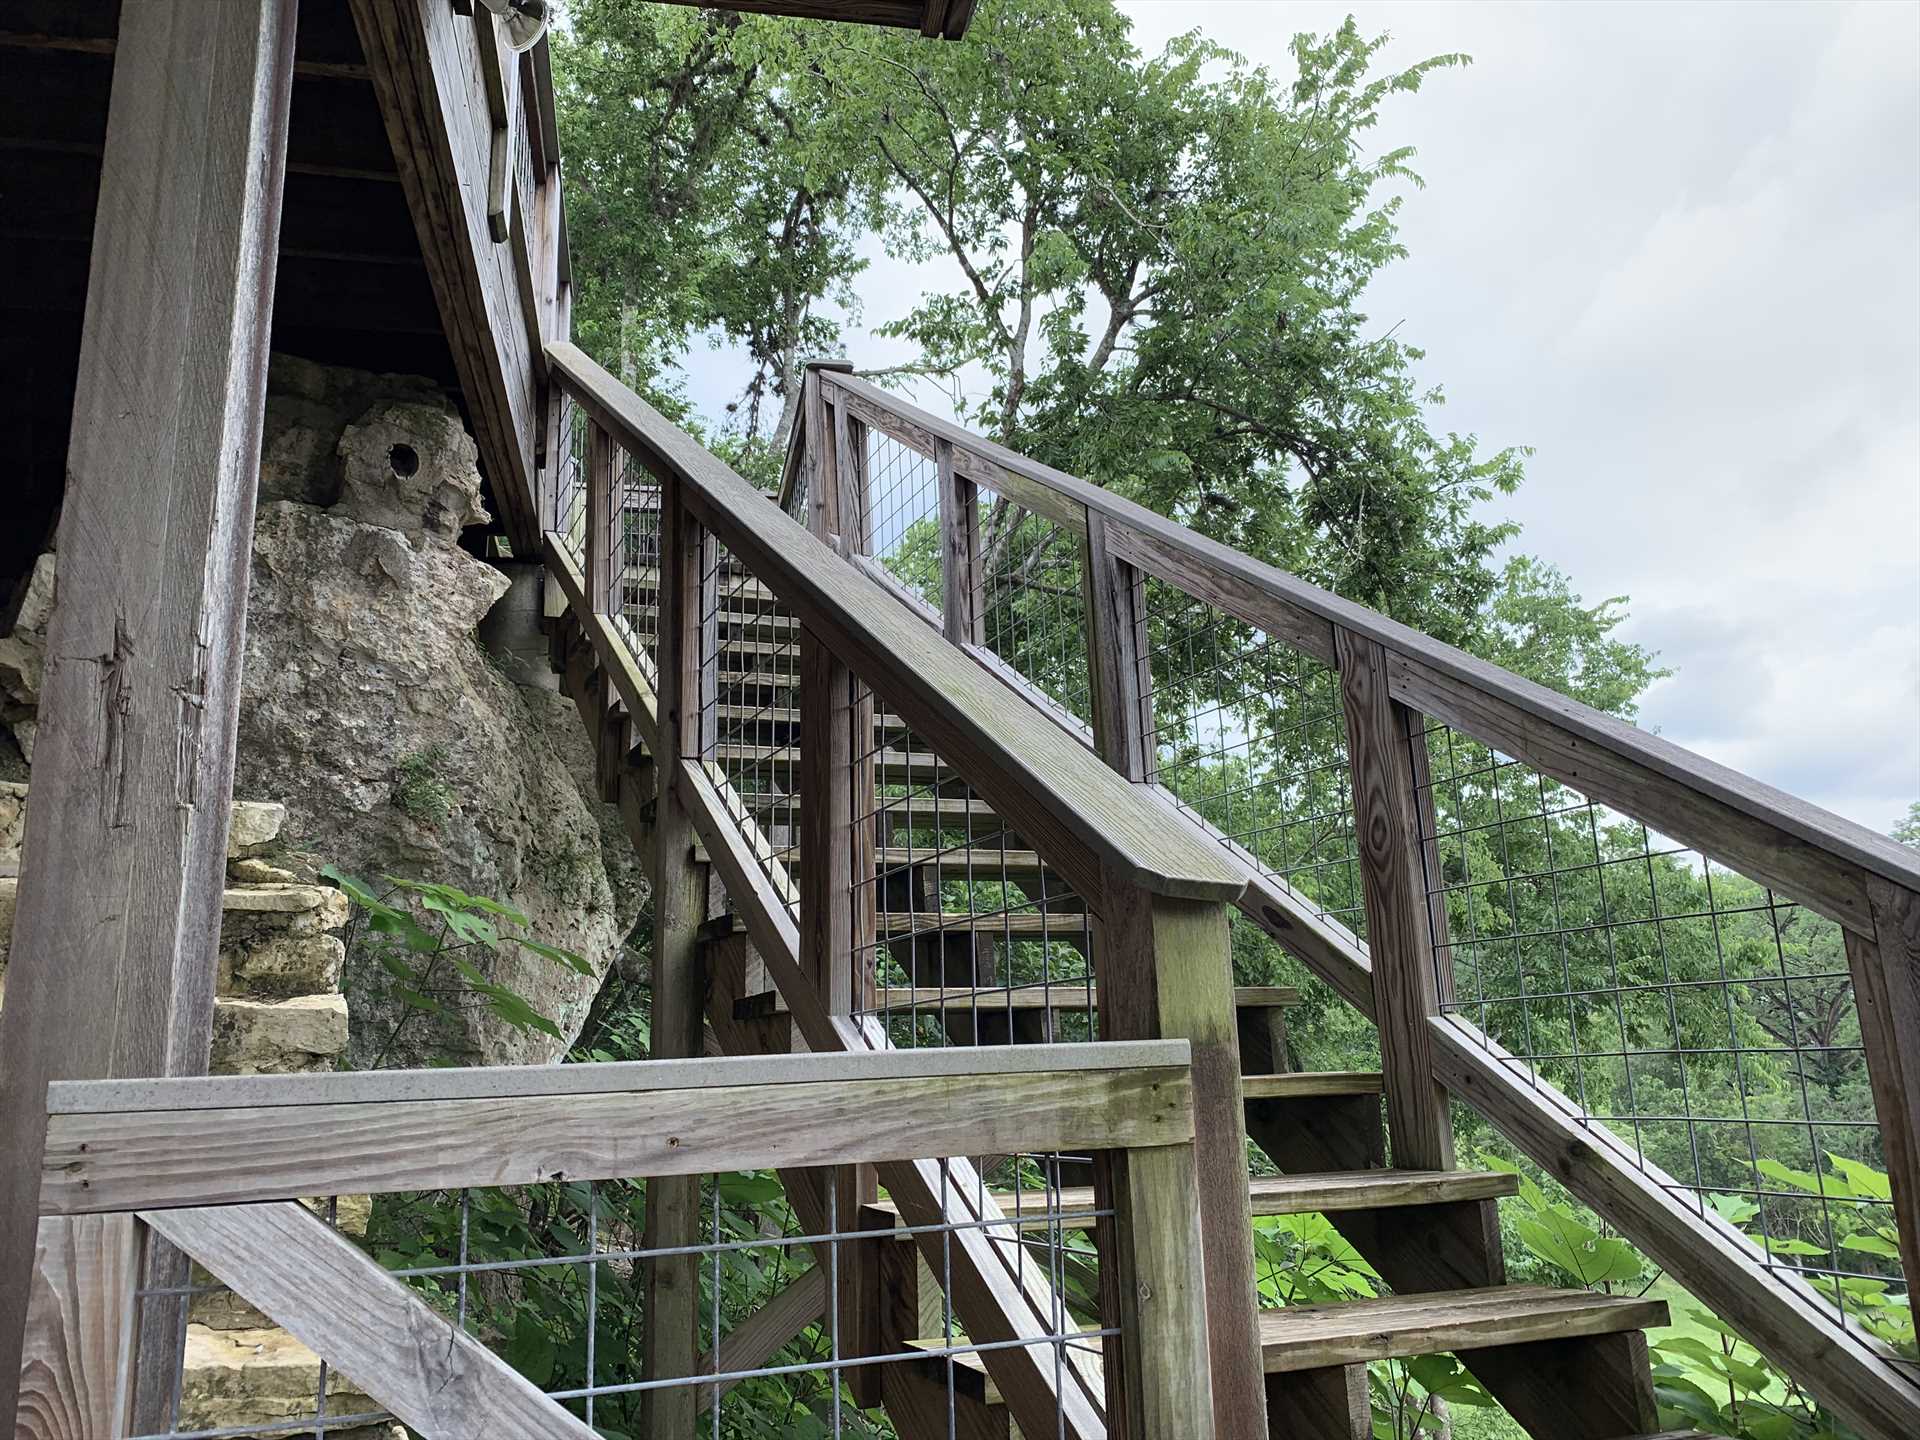                                                 No matter where you're headed here, take a moment to admire the inspiring sights of the surrounding Hill Country.